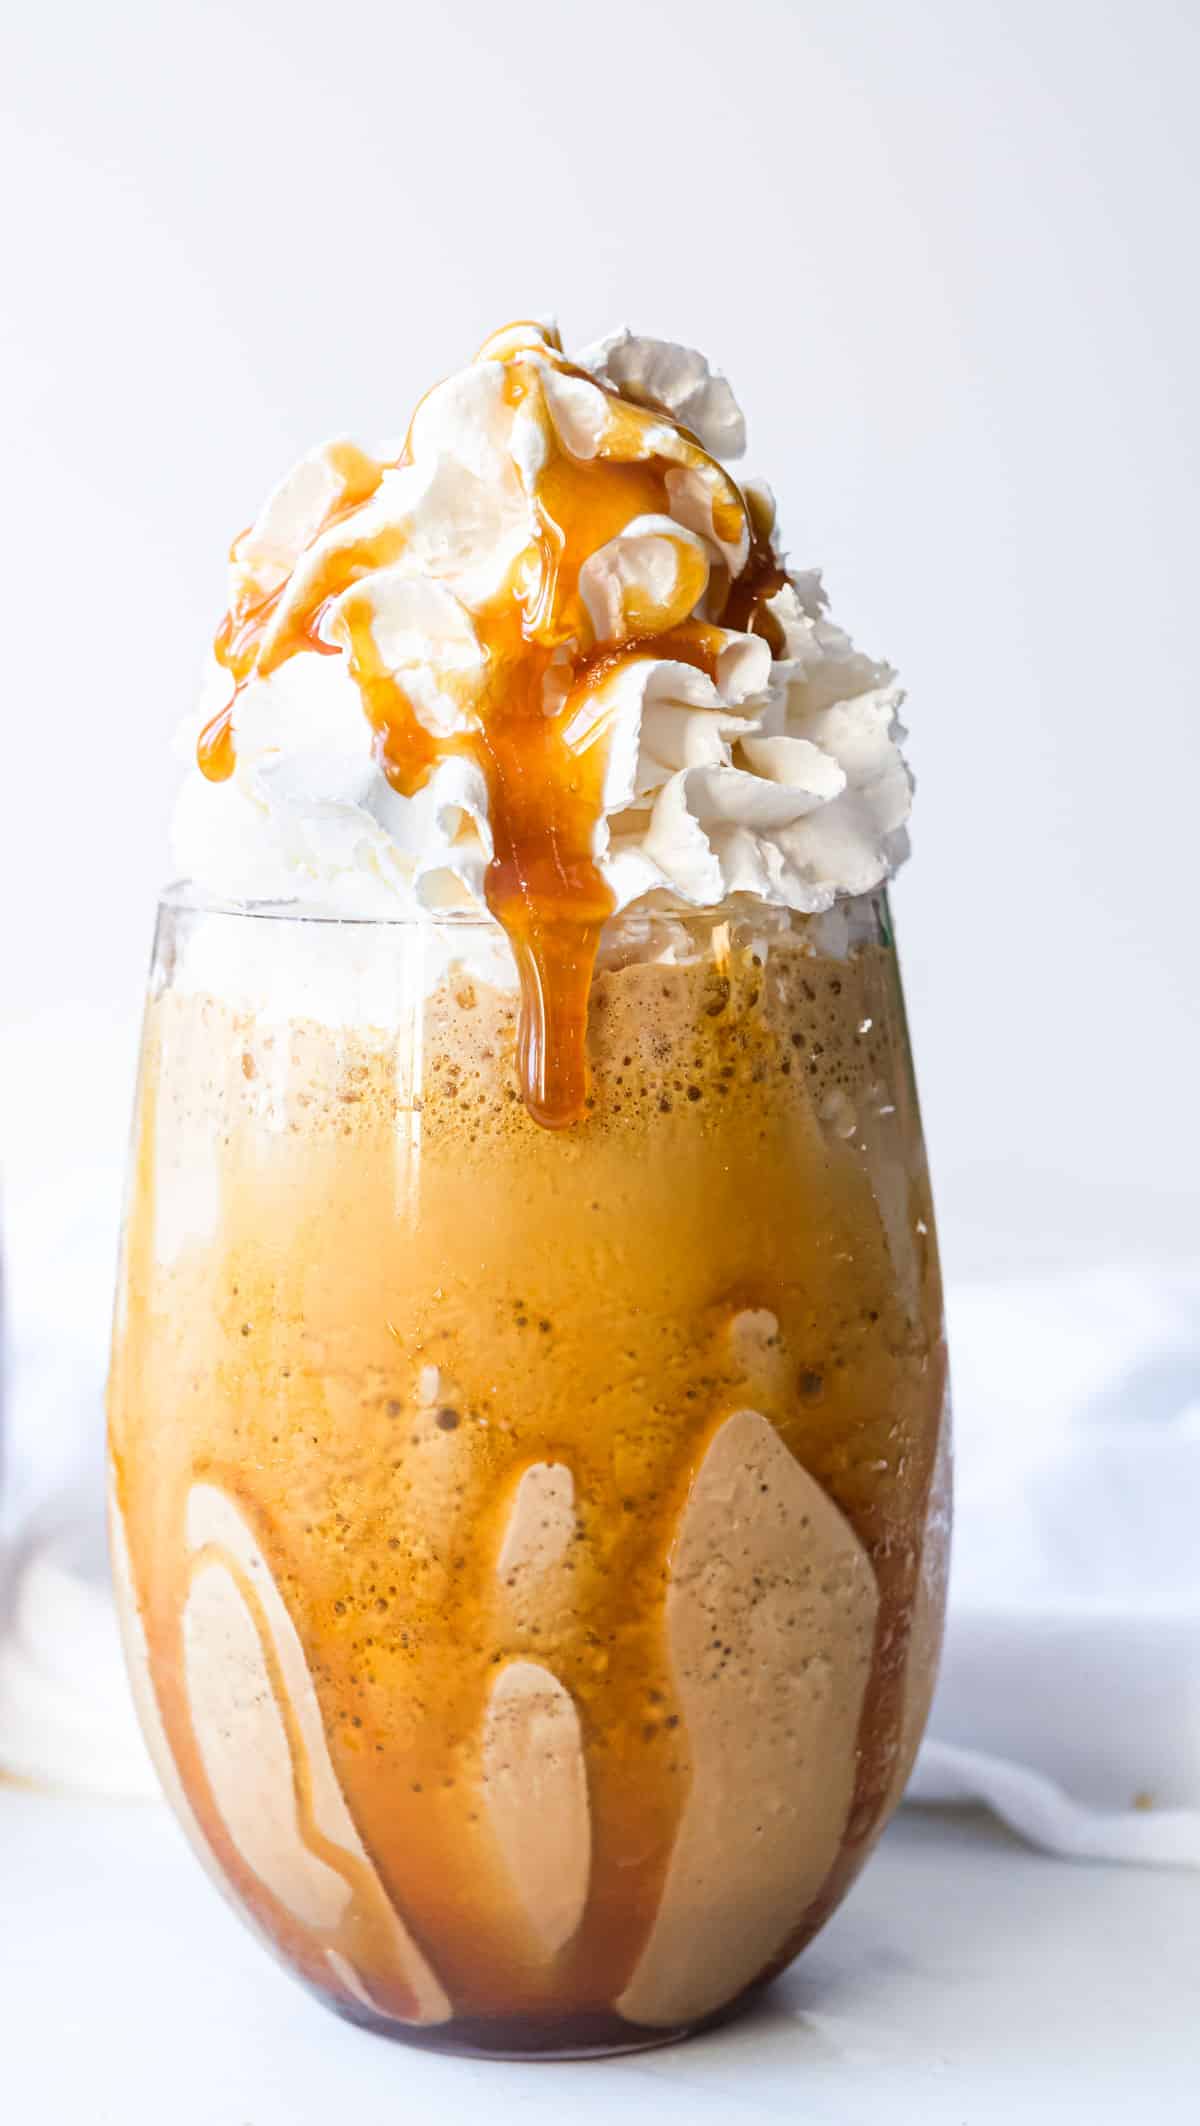 one completed caramel frappe topped with whipped cream and caramel sauce